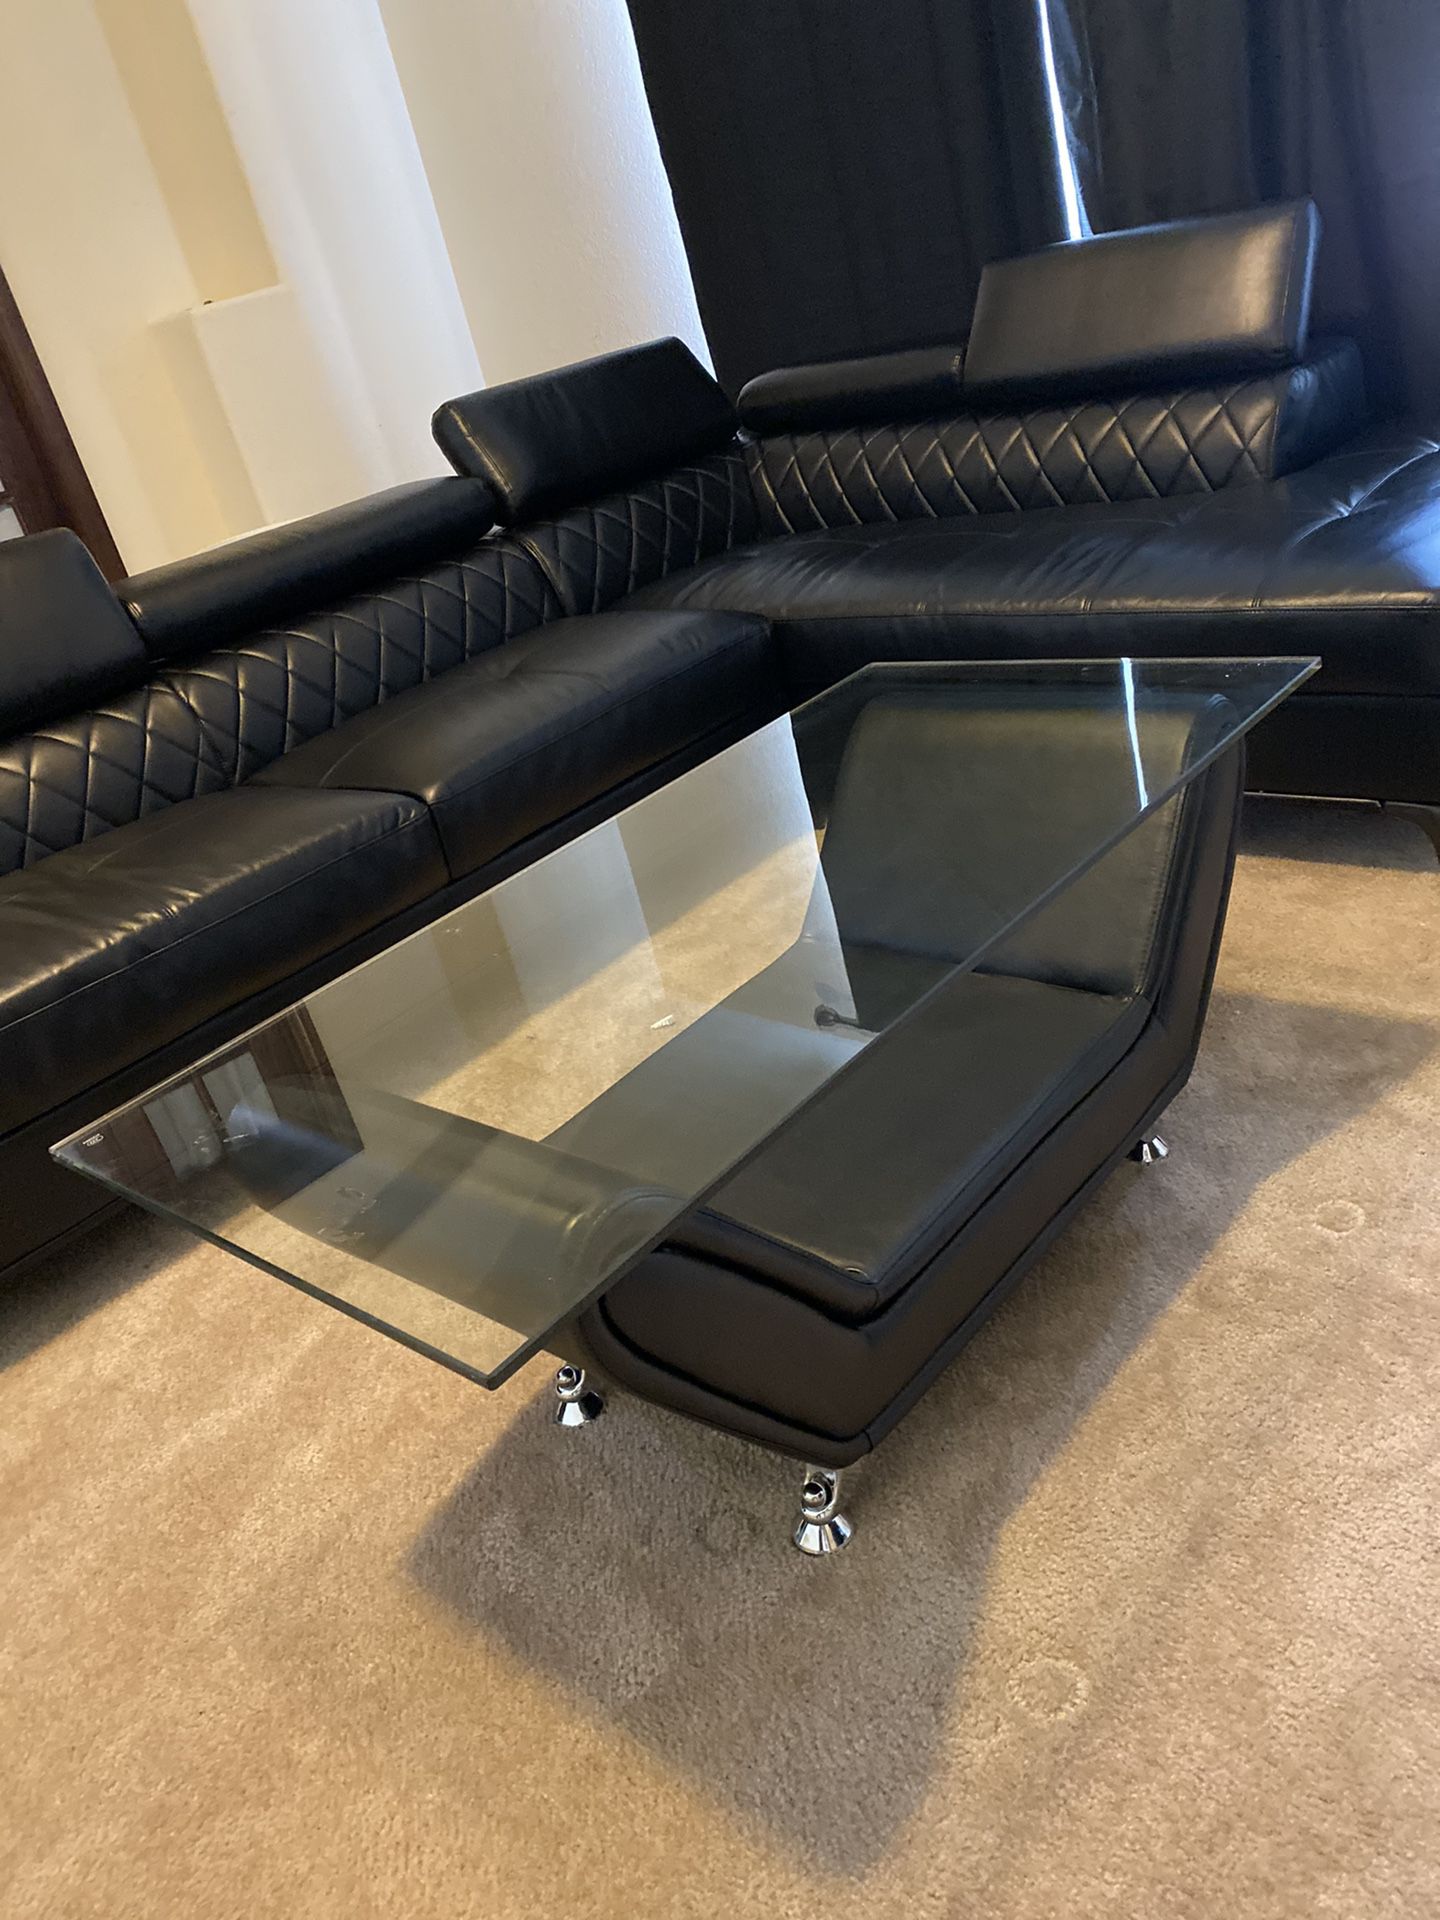 Black leather couch / sectional plus table